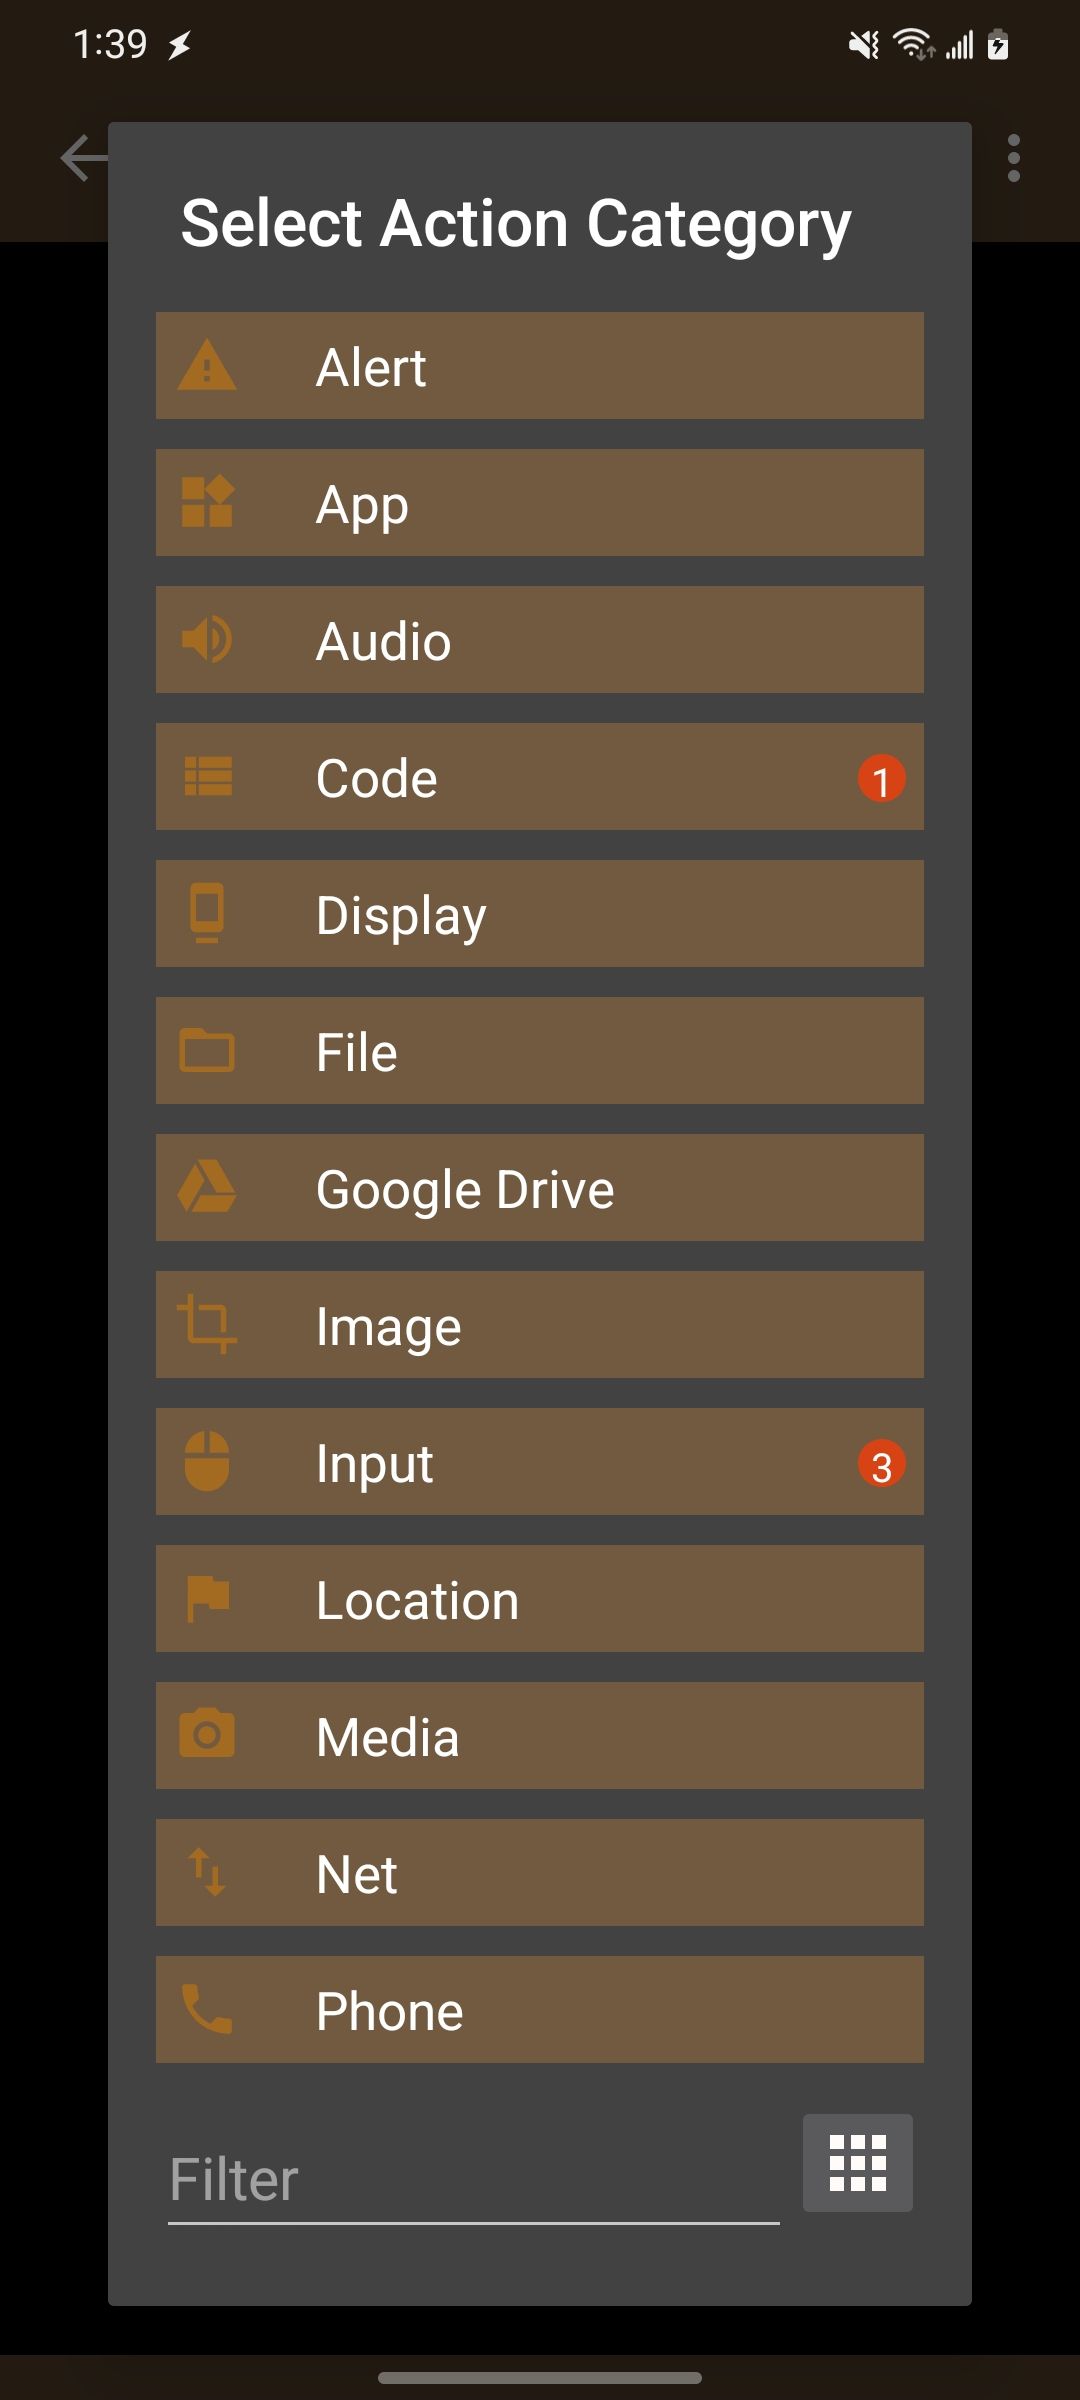 The main screen for selecting which action to use in the Tasker app